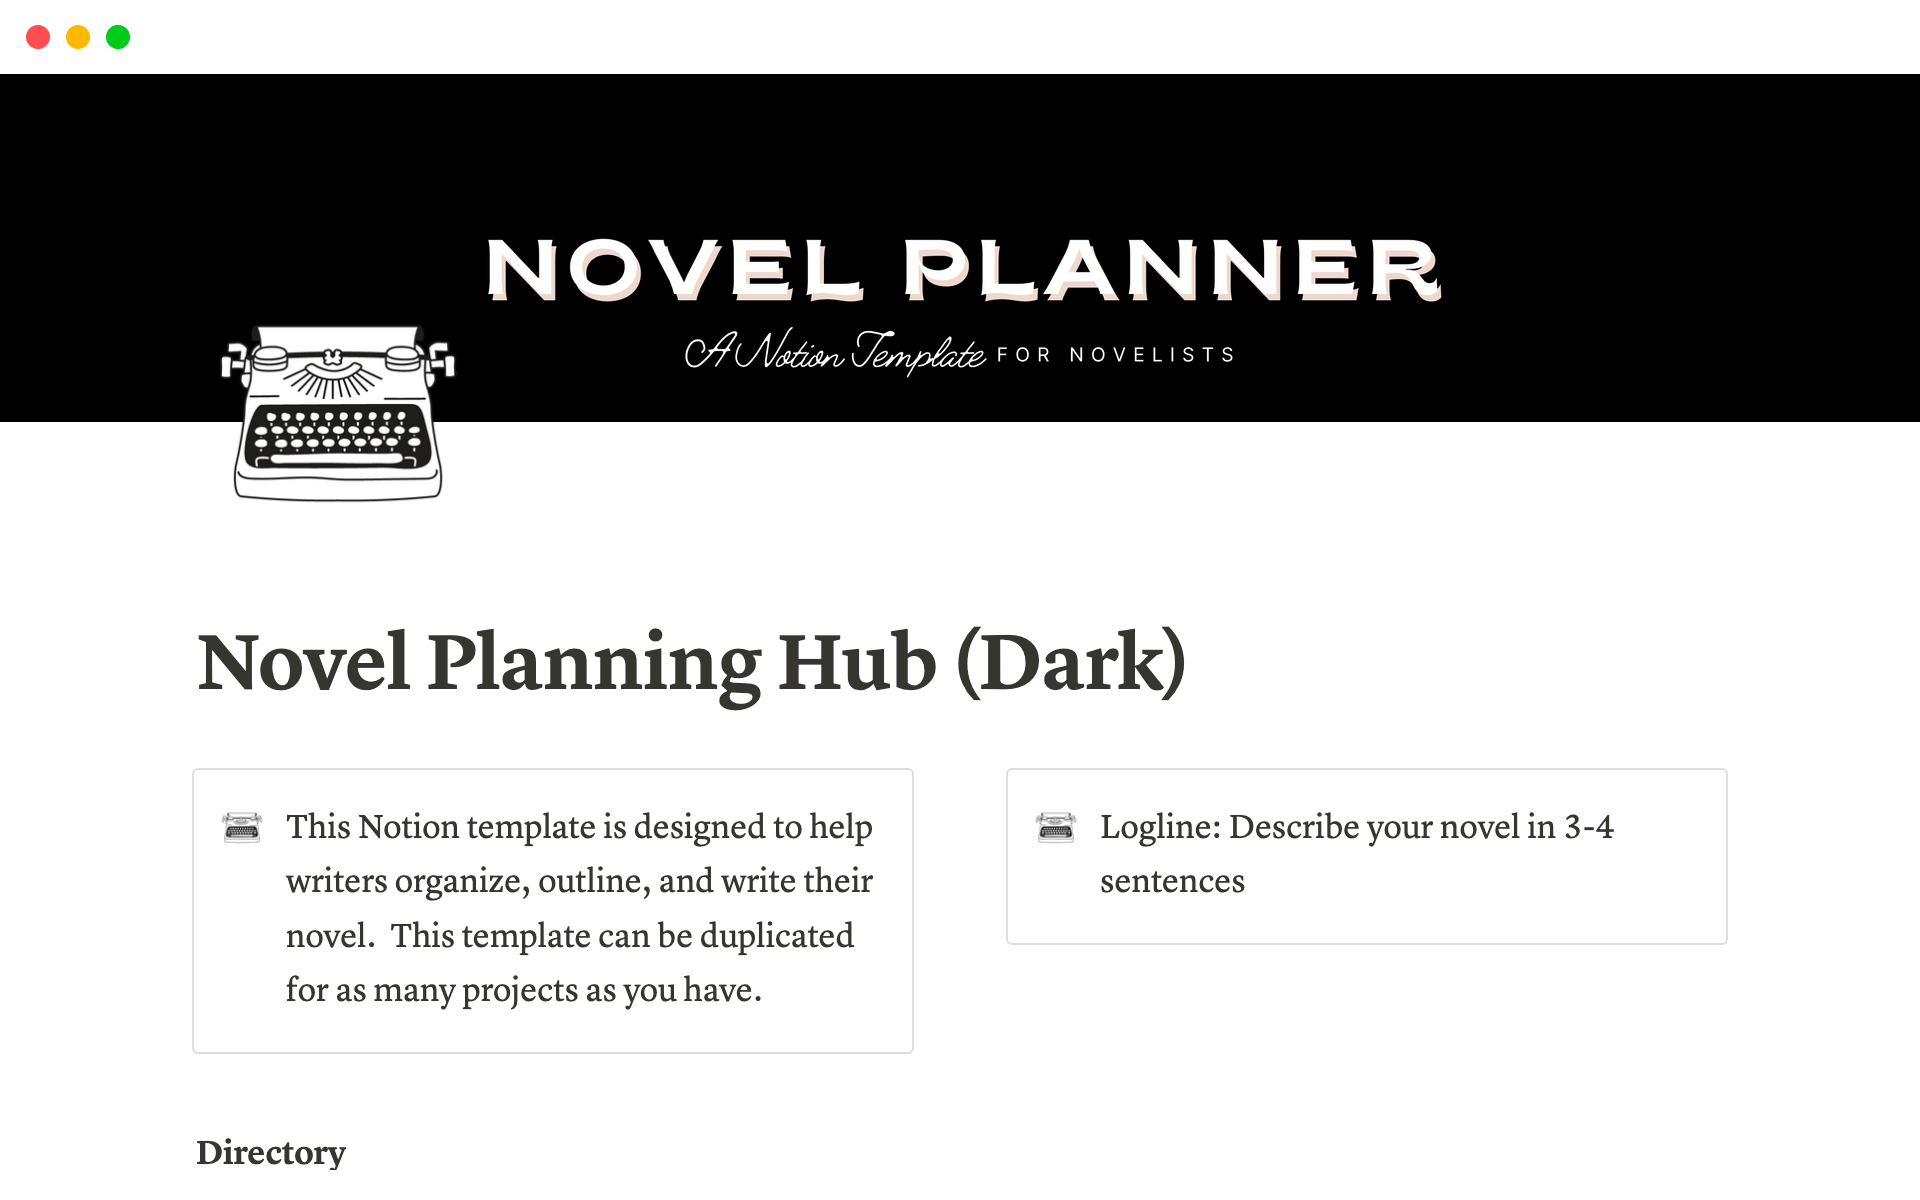 This Novel Planner in Notion is perfect for any fiction writer seeking to write a novel, short story, or any work of fiction.